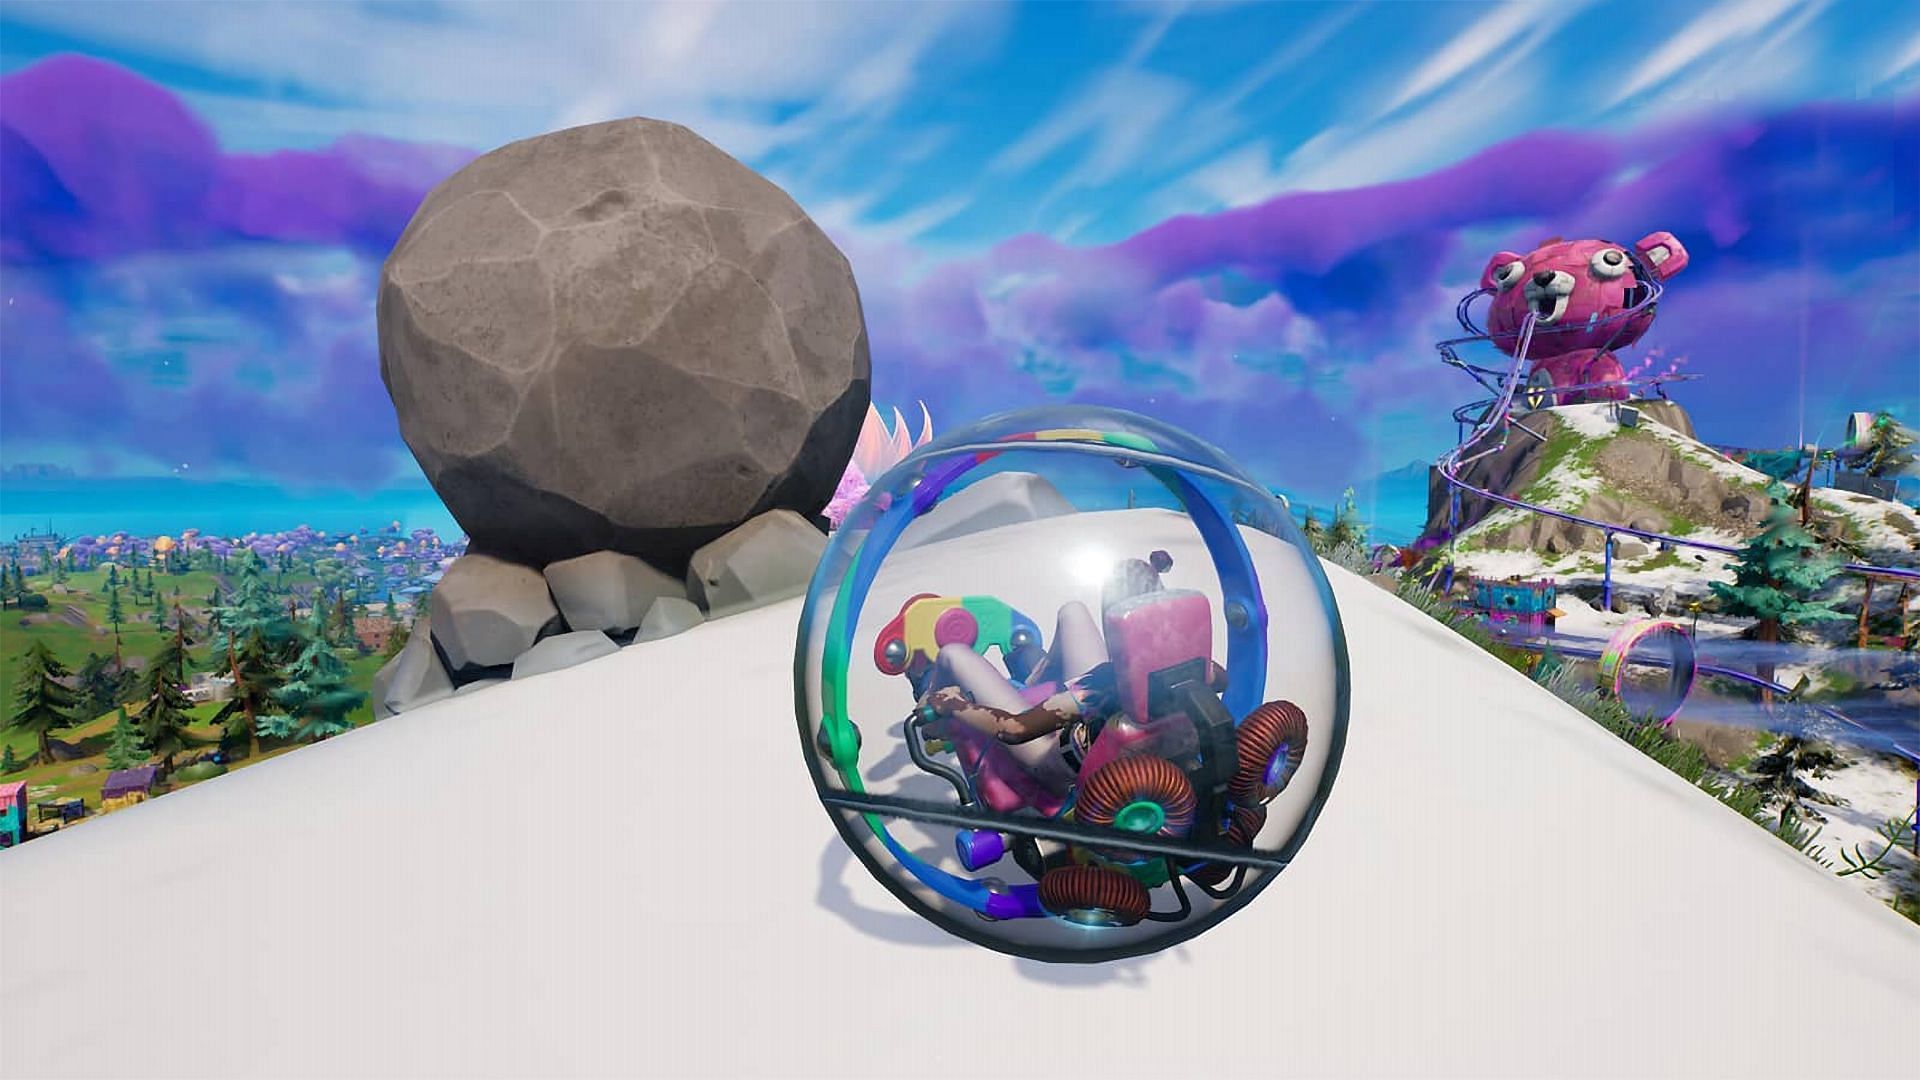 The Baller can be used to move quickly over the Fortnite map. (Image via Epic Games)